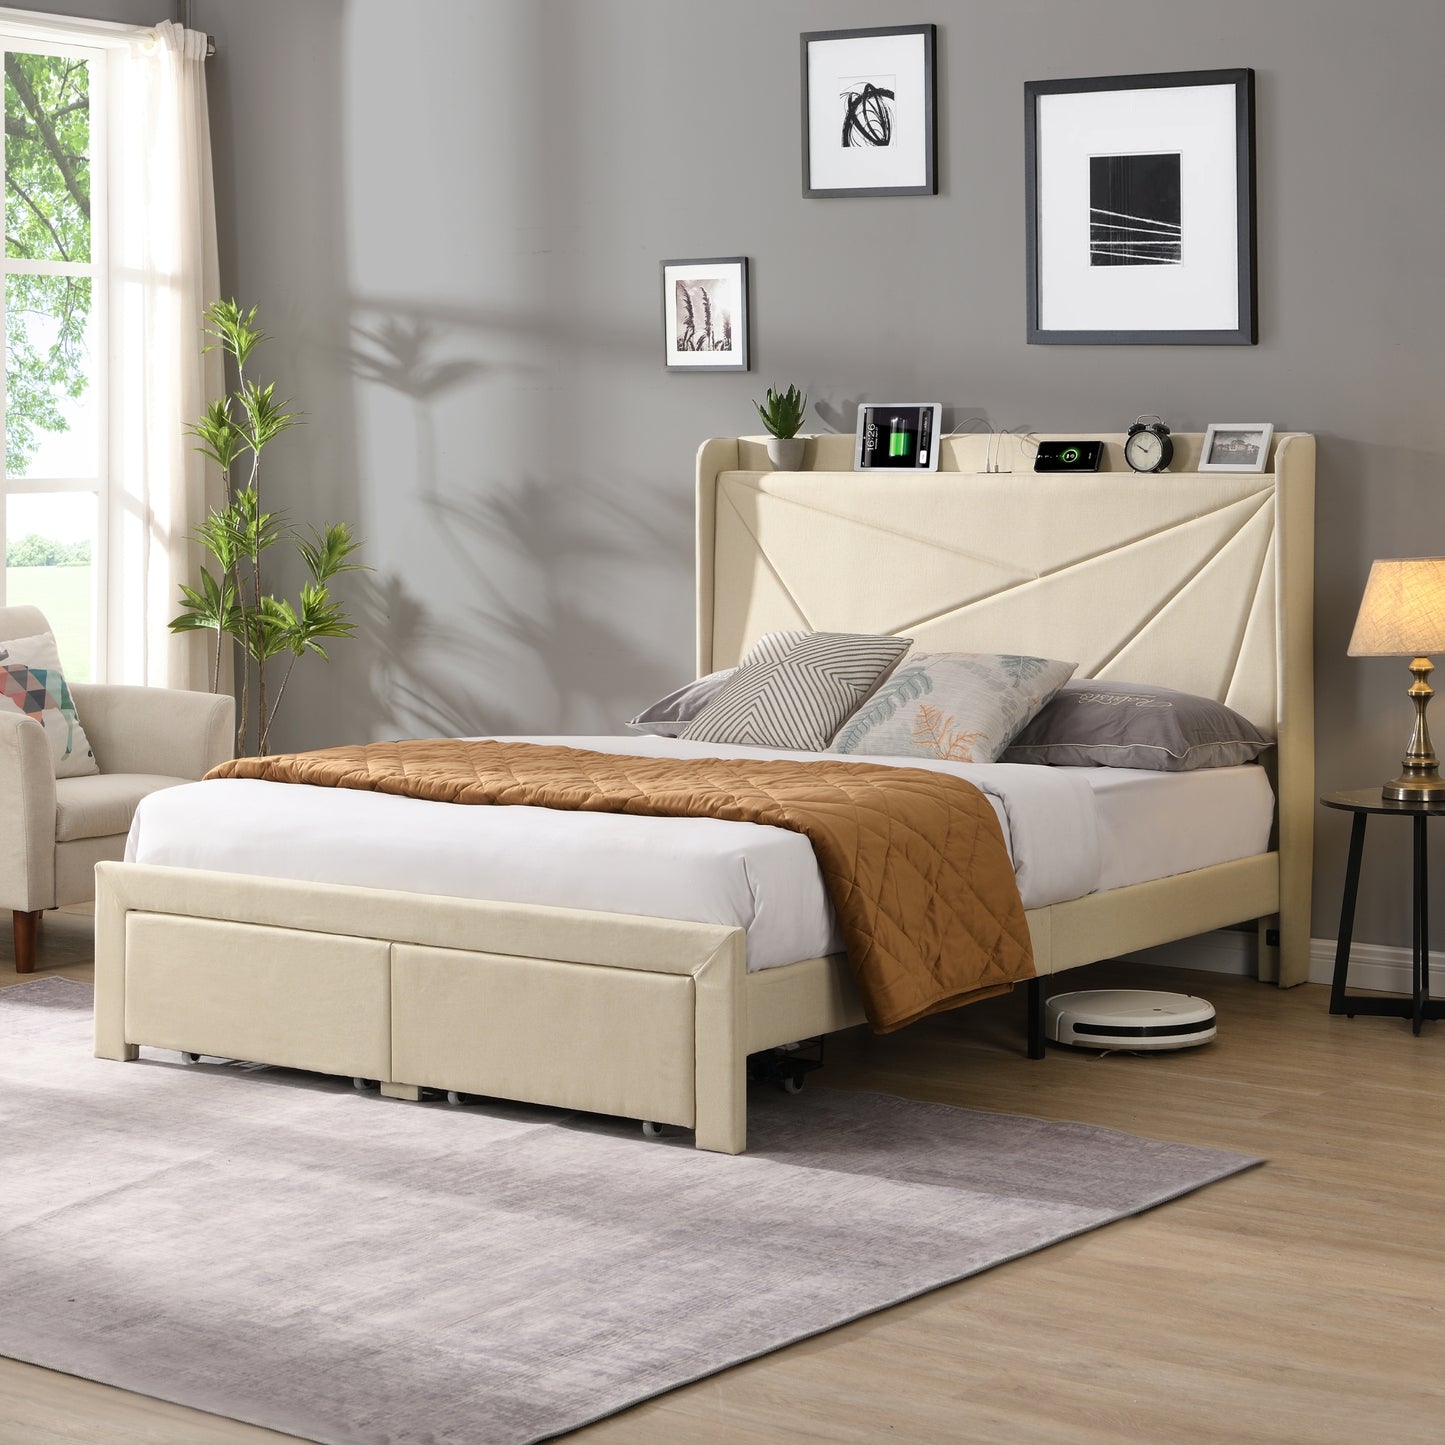 Full Size Platform Bed Frame with 2 Storage Drawers, Upholstered Bed Frame with Wingback Headboard Storage Shelf Built-in USB Charging Stations and Strong Wood Slats Support, No Box Spring Needed, Beige